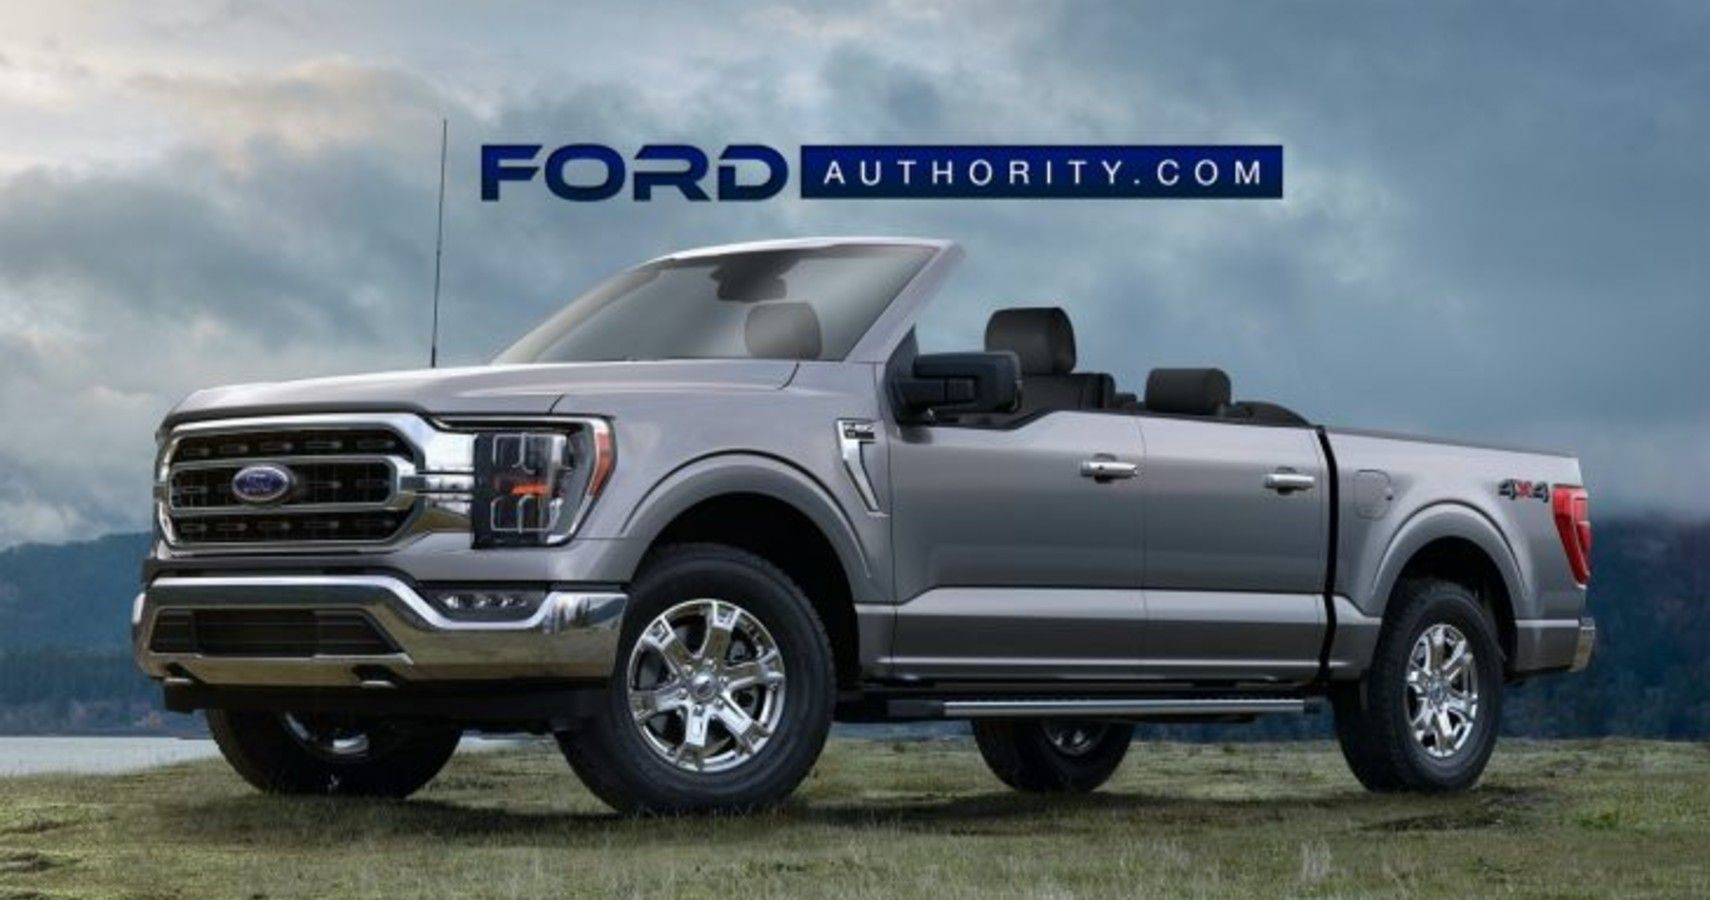 Would You Buy This 2022 Ford F-150 Convertible For $80,000?